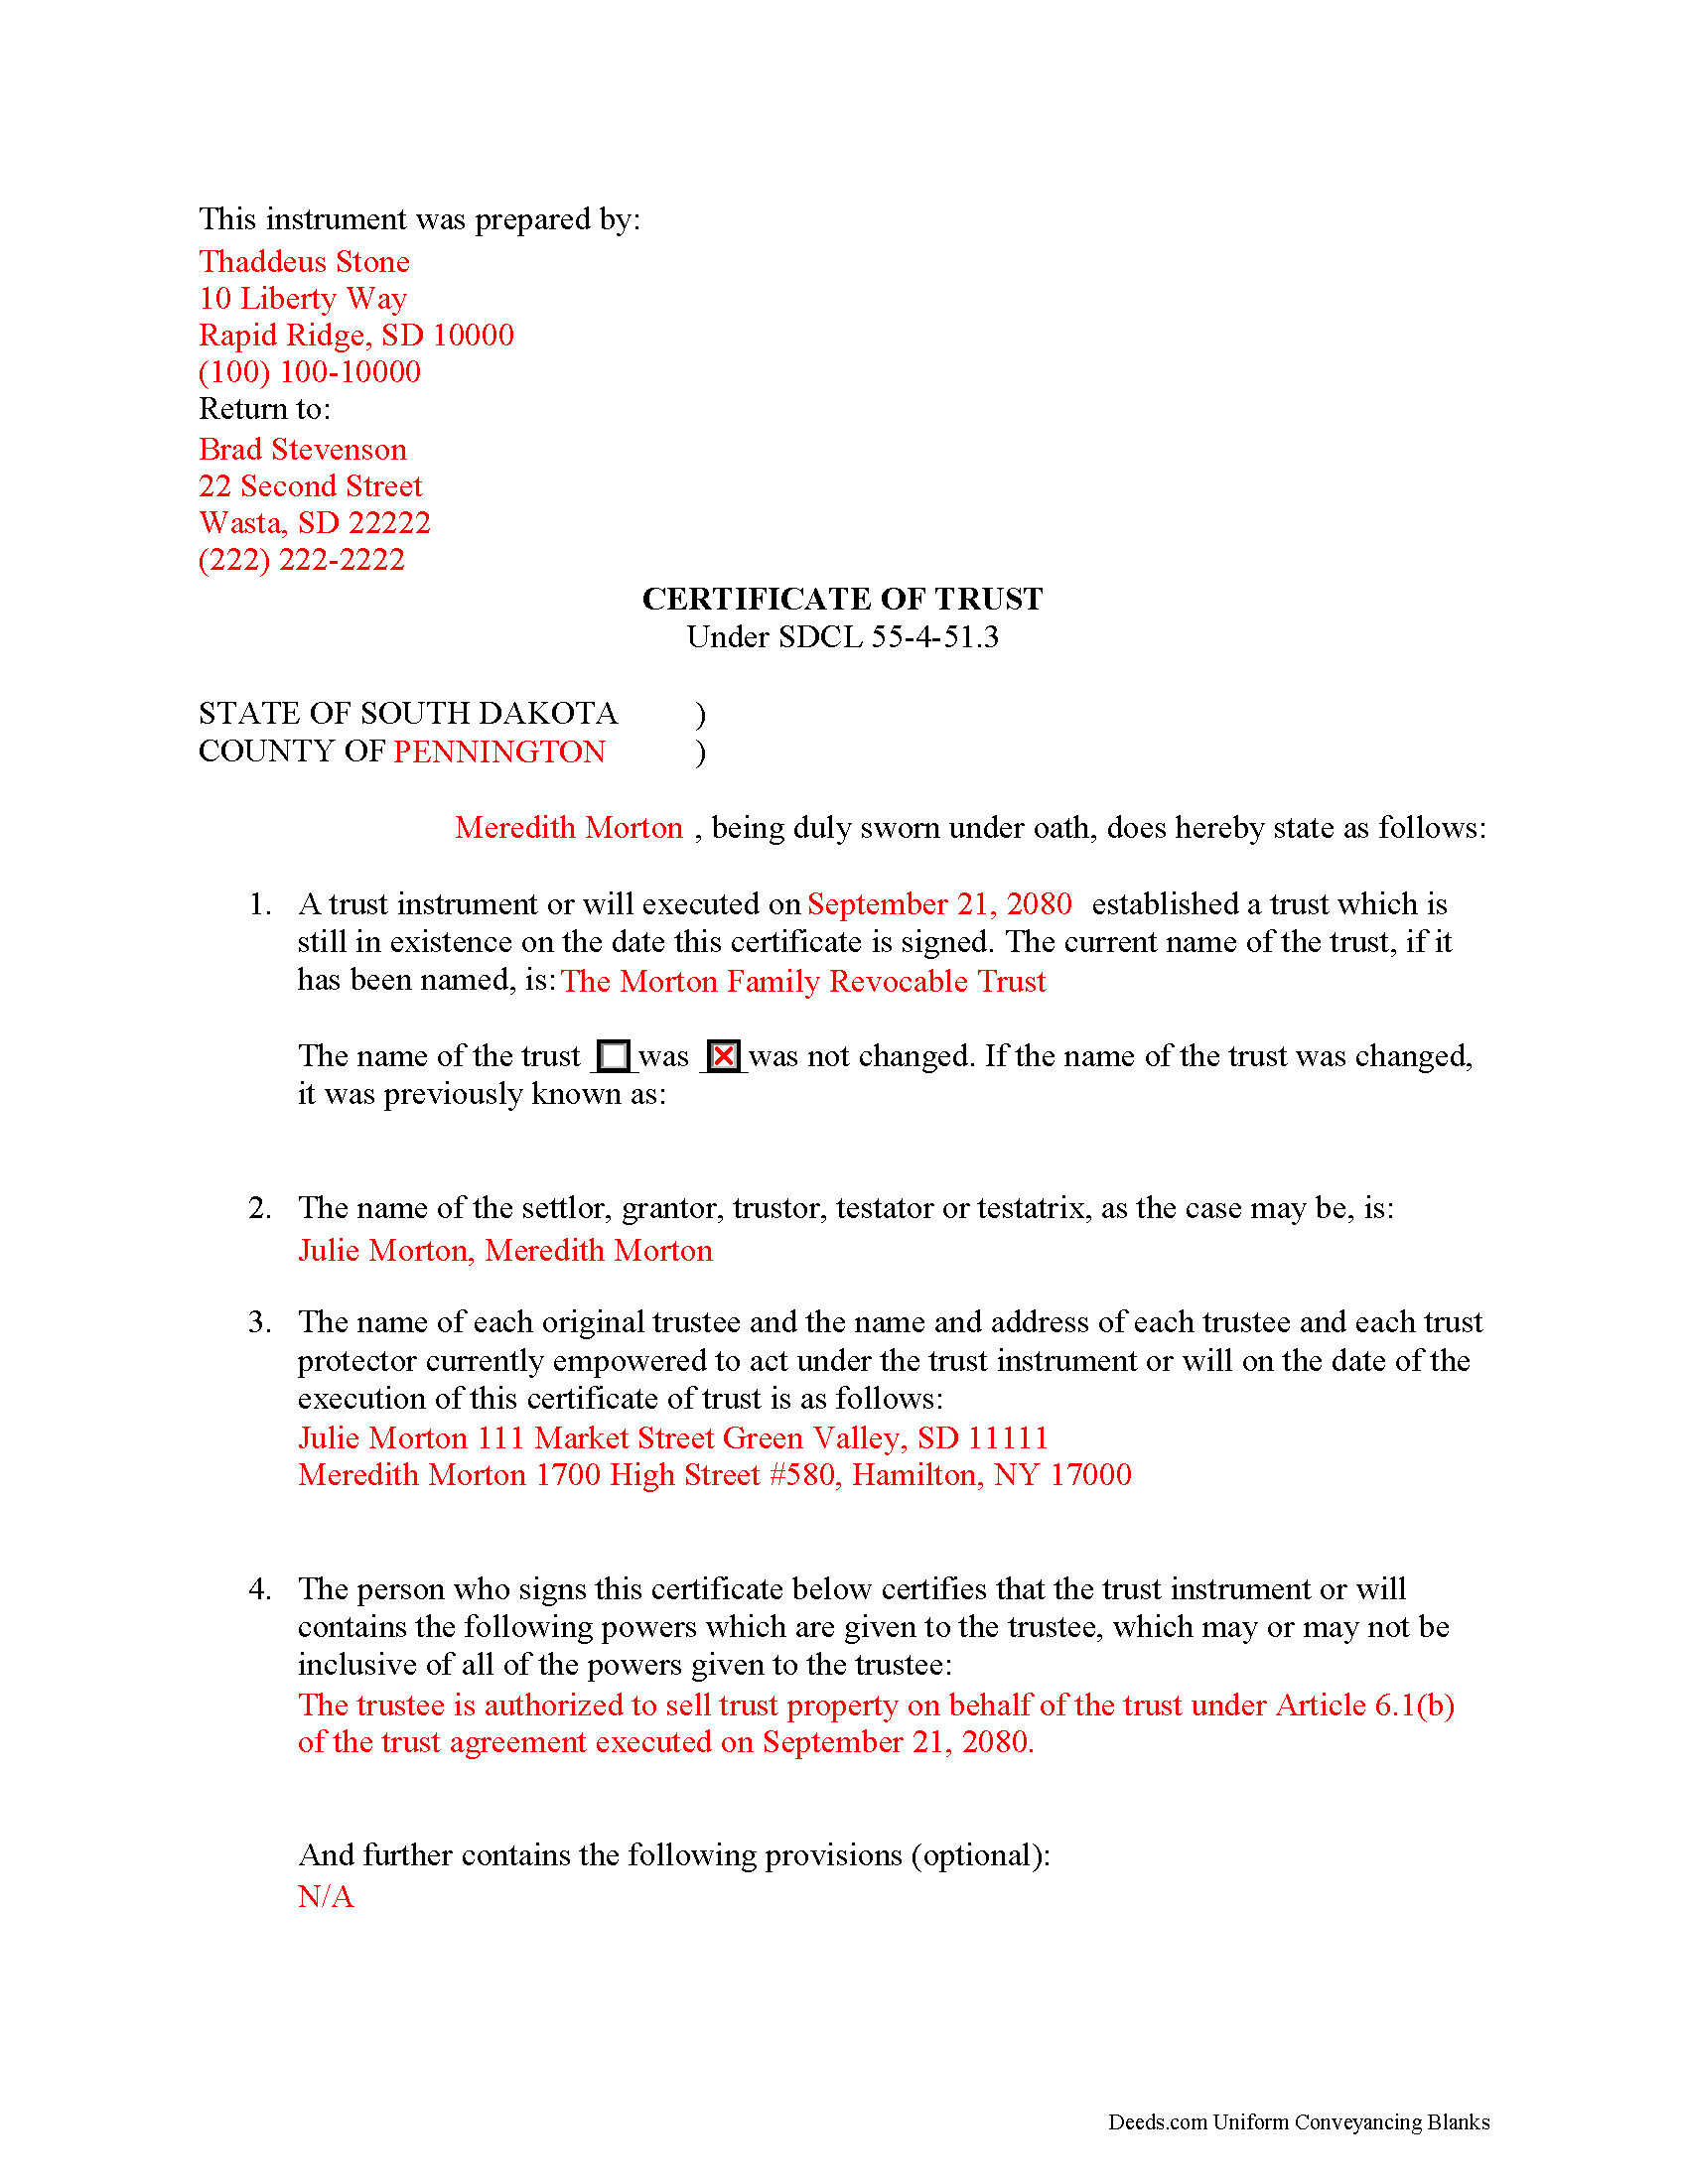 Completed Example of the Certificate of Trust Document